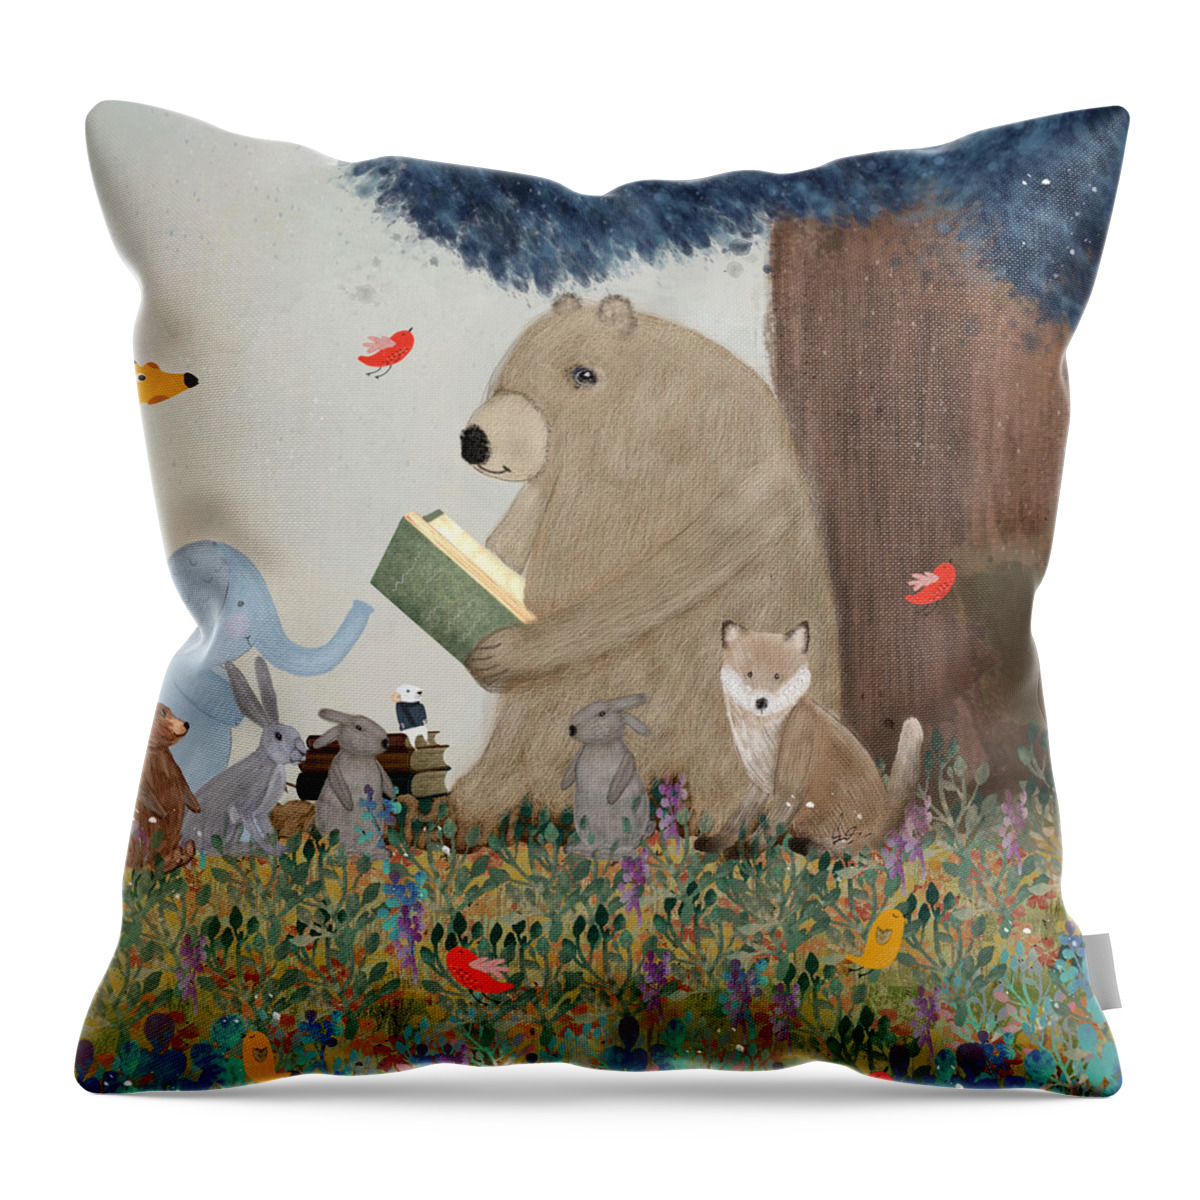 Nursery Art Throw Pillow featuring the painting Once Upon A Time by Bri Buckley